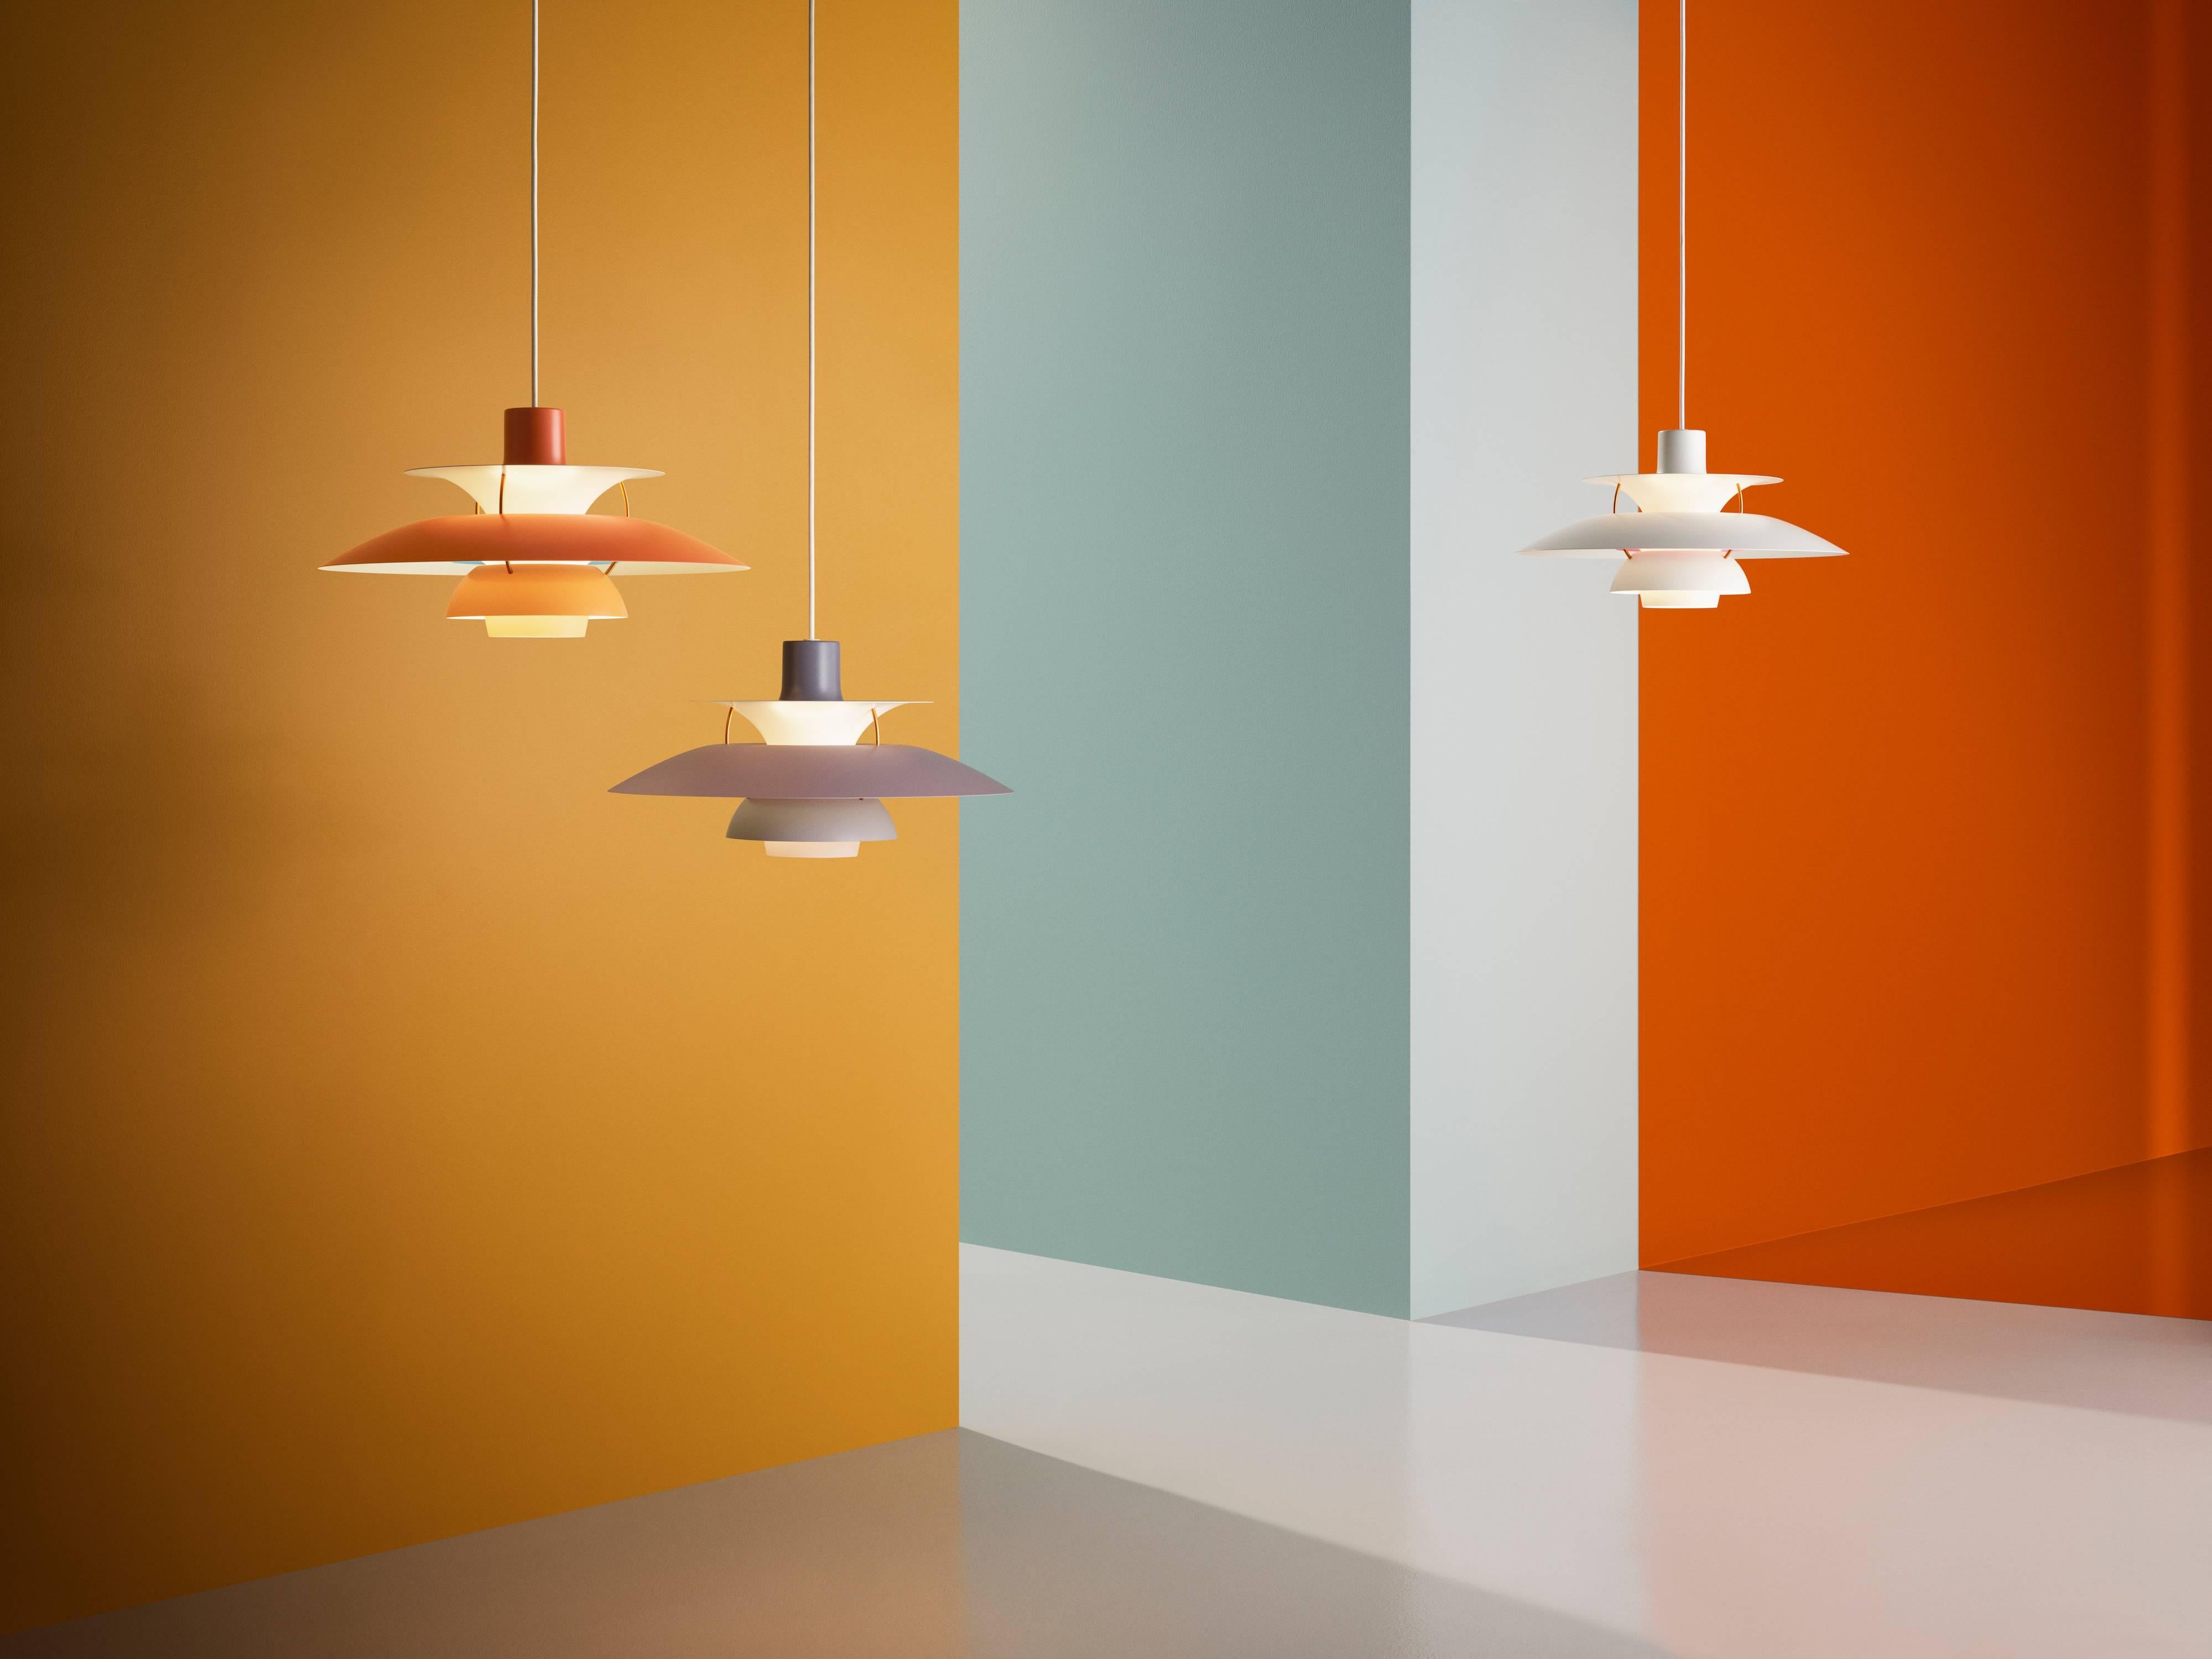 Poul Henningsen PH 5 pendant for Louis Poulsen in grey. Poul Henningsen introduced his iconic PH 5 pendant light in 1958. Six decades later, the PH 5 remains the bestselling design in the Louis Poulsen's portfolio. The PH 5's painted metal shades